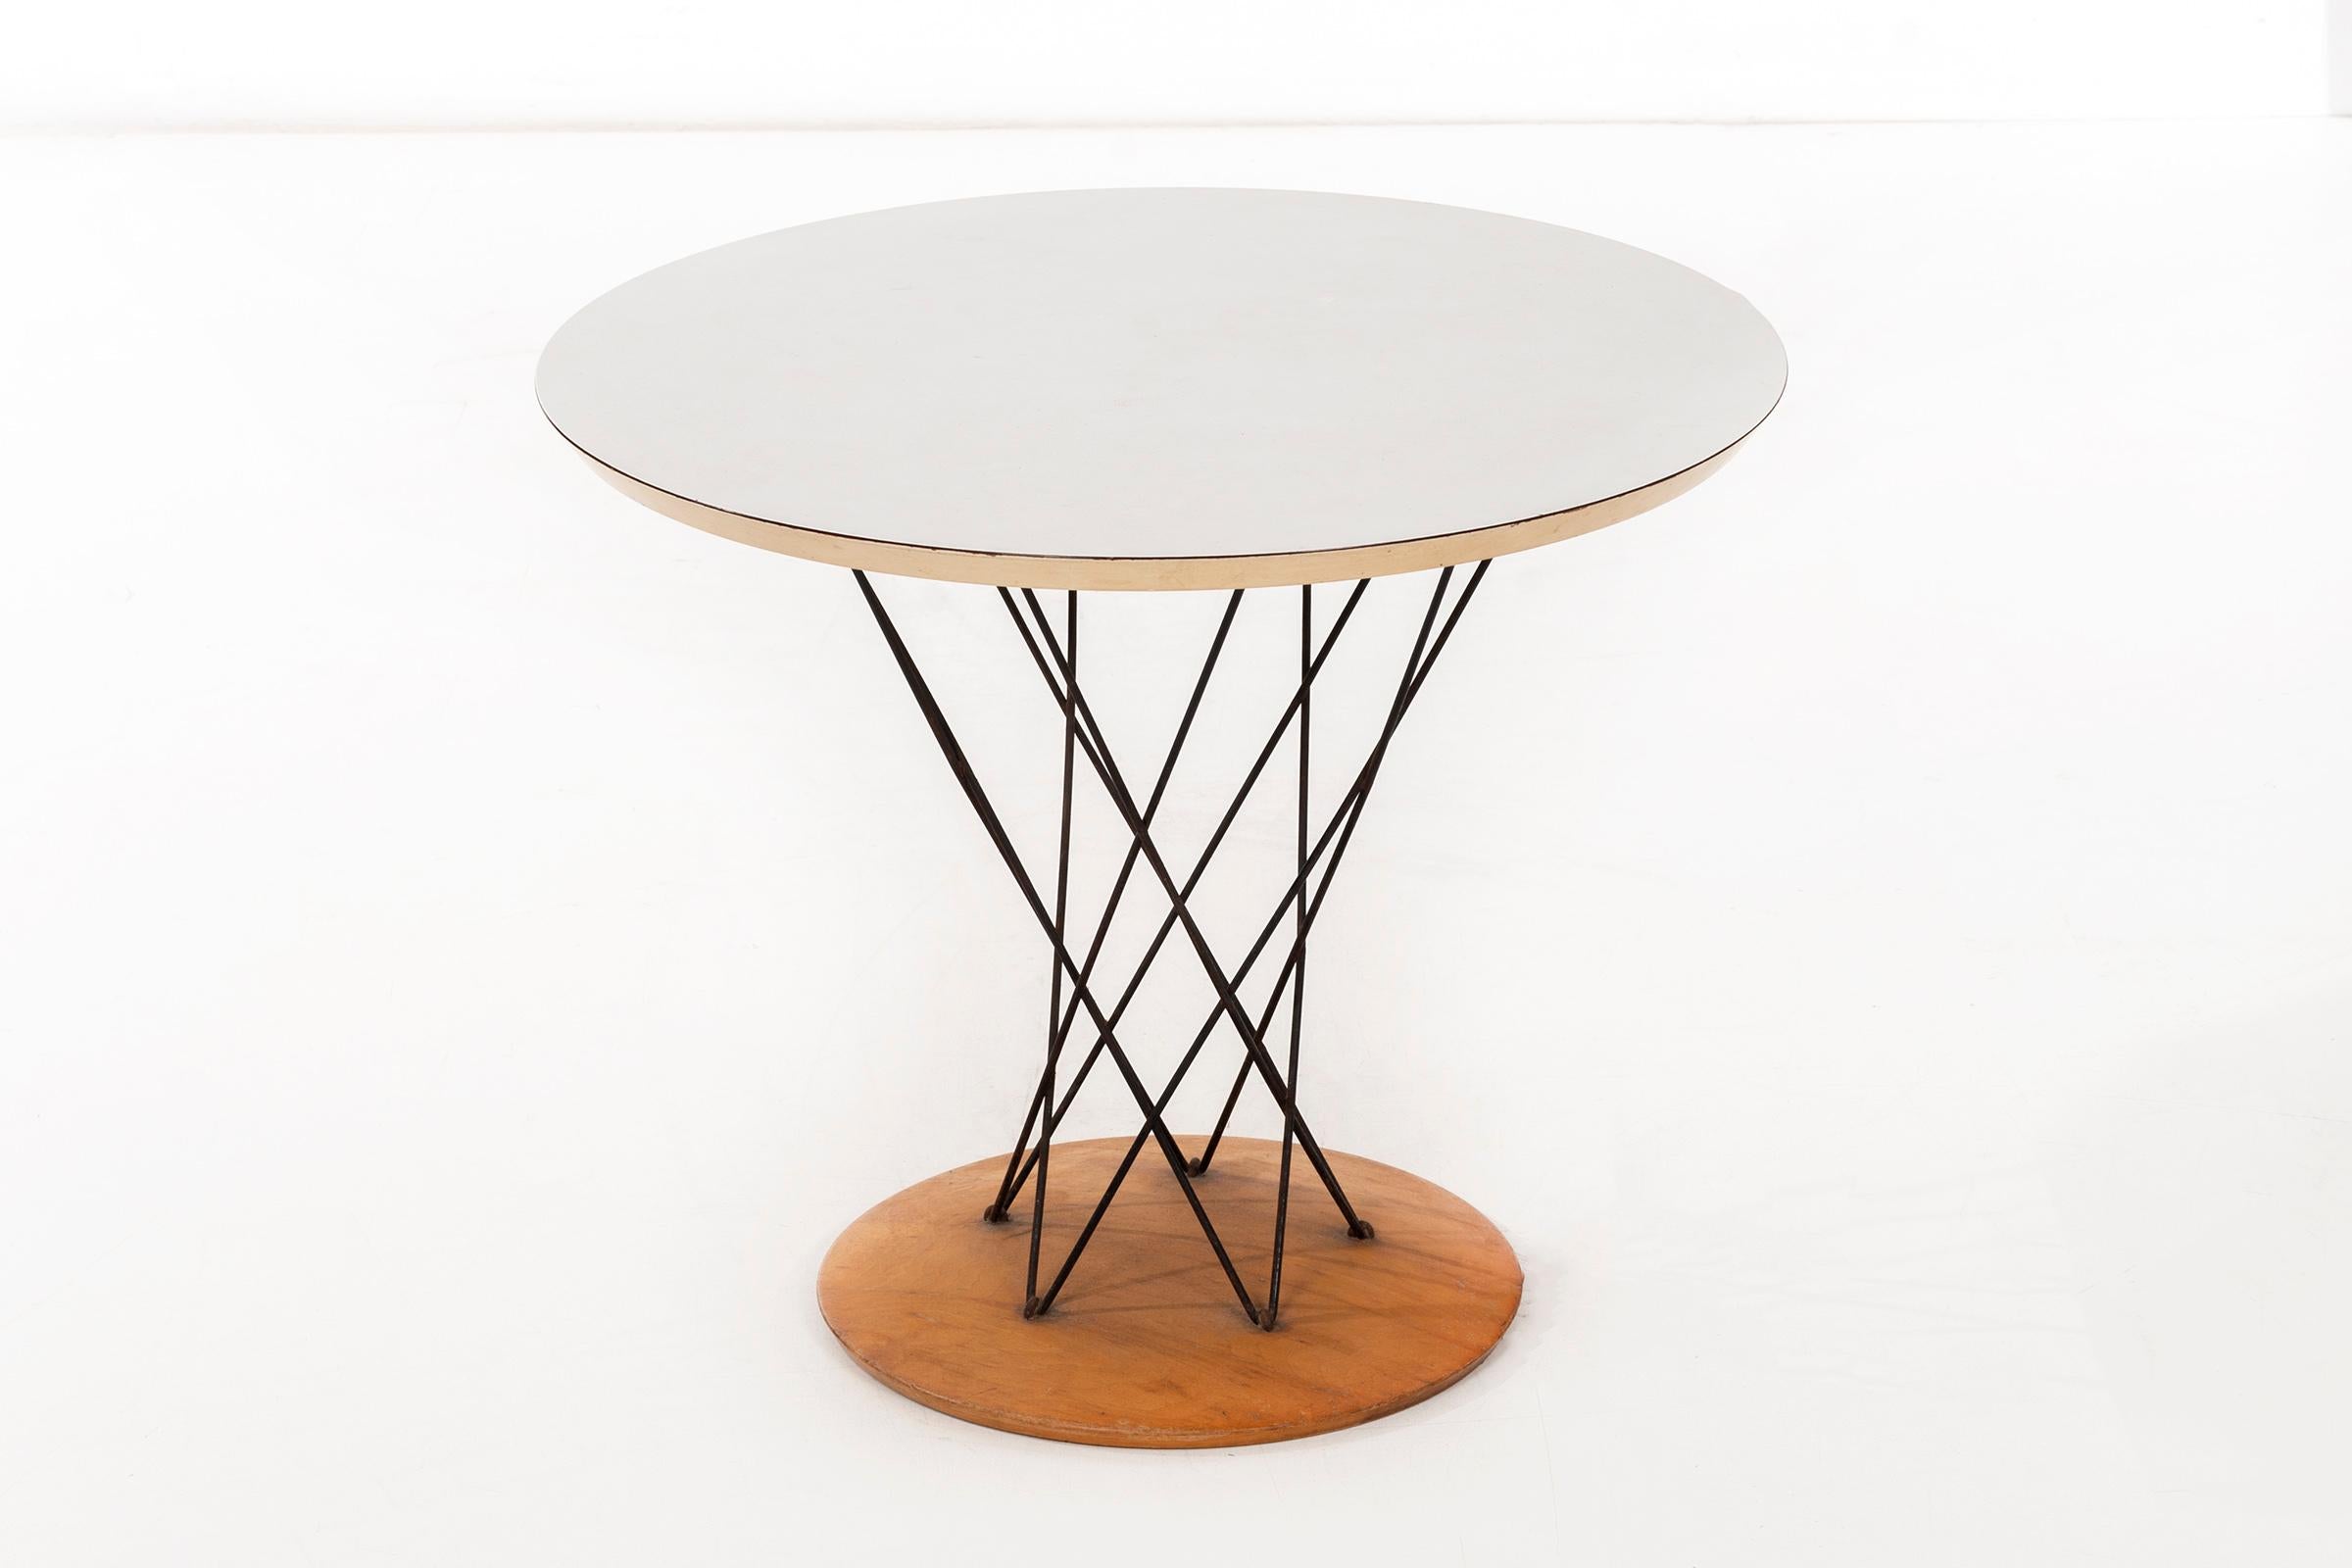 Noguchi for Knoll Cyclone table, steel spokes with laminated top and birchwood base, original condition with Knoll label.